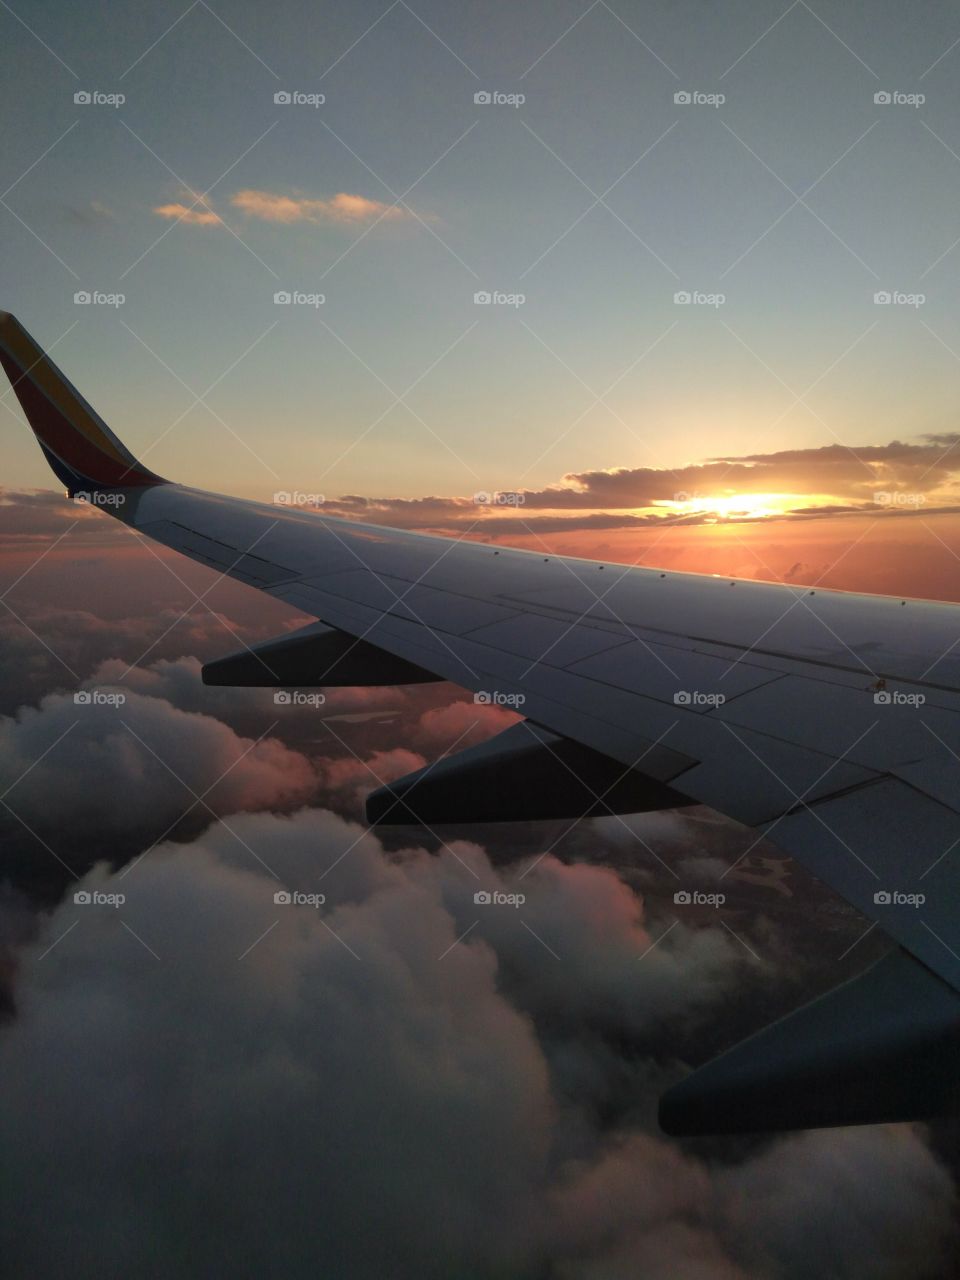 A breathtaking view out the plane's window.